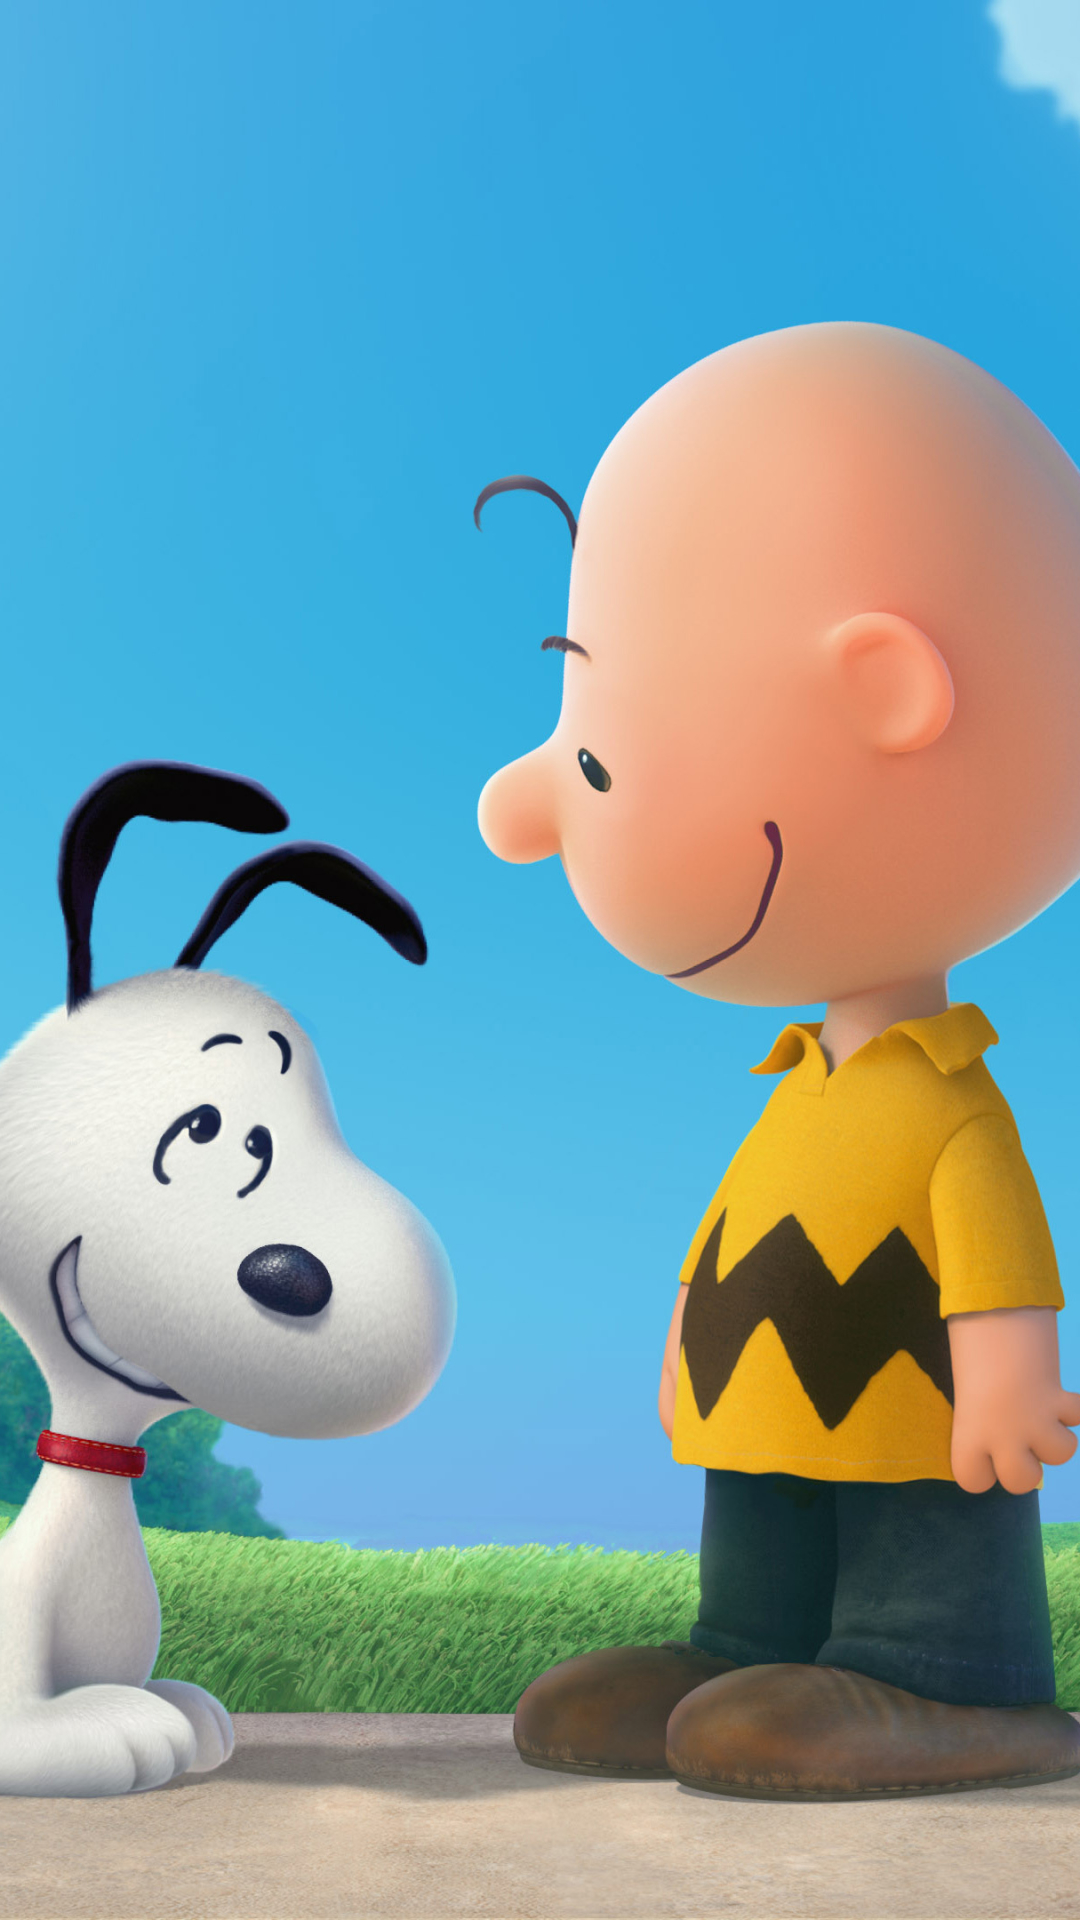 The Peanuts Movie Phone Wallpaper - Mobile Abyss